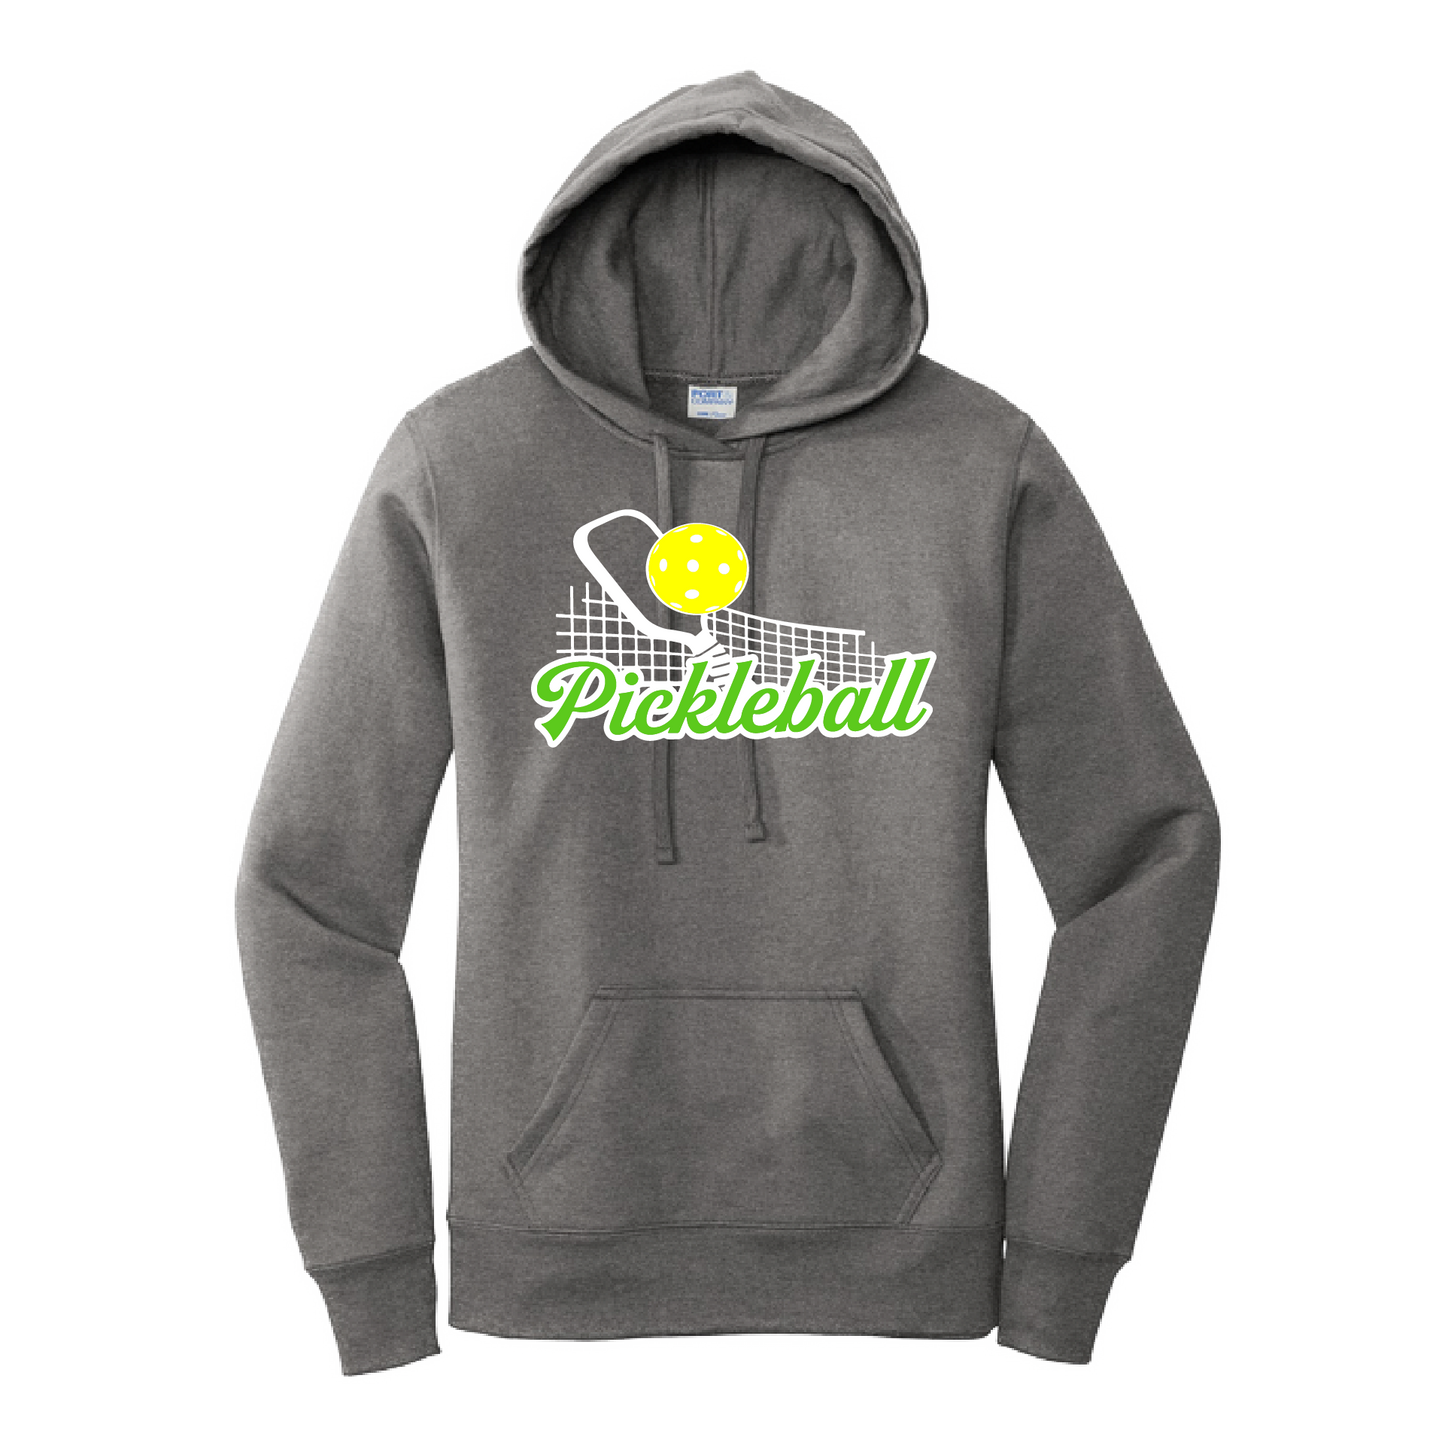 Pickleball Design: Pickleball and Net  Women's Hooded pullover Sweatshirt  Turn up the volume in this Women's Sweatshirts with its perfect mix of softness and attitude. Ultra soft lined inside with a lined hood also. This is fitted nicely for a women's figure. Front pouch pocket.